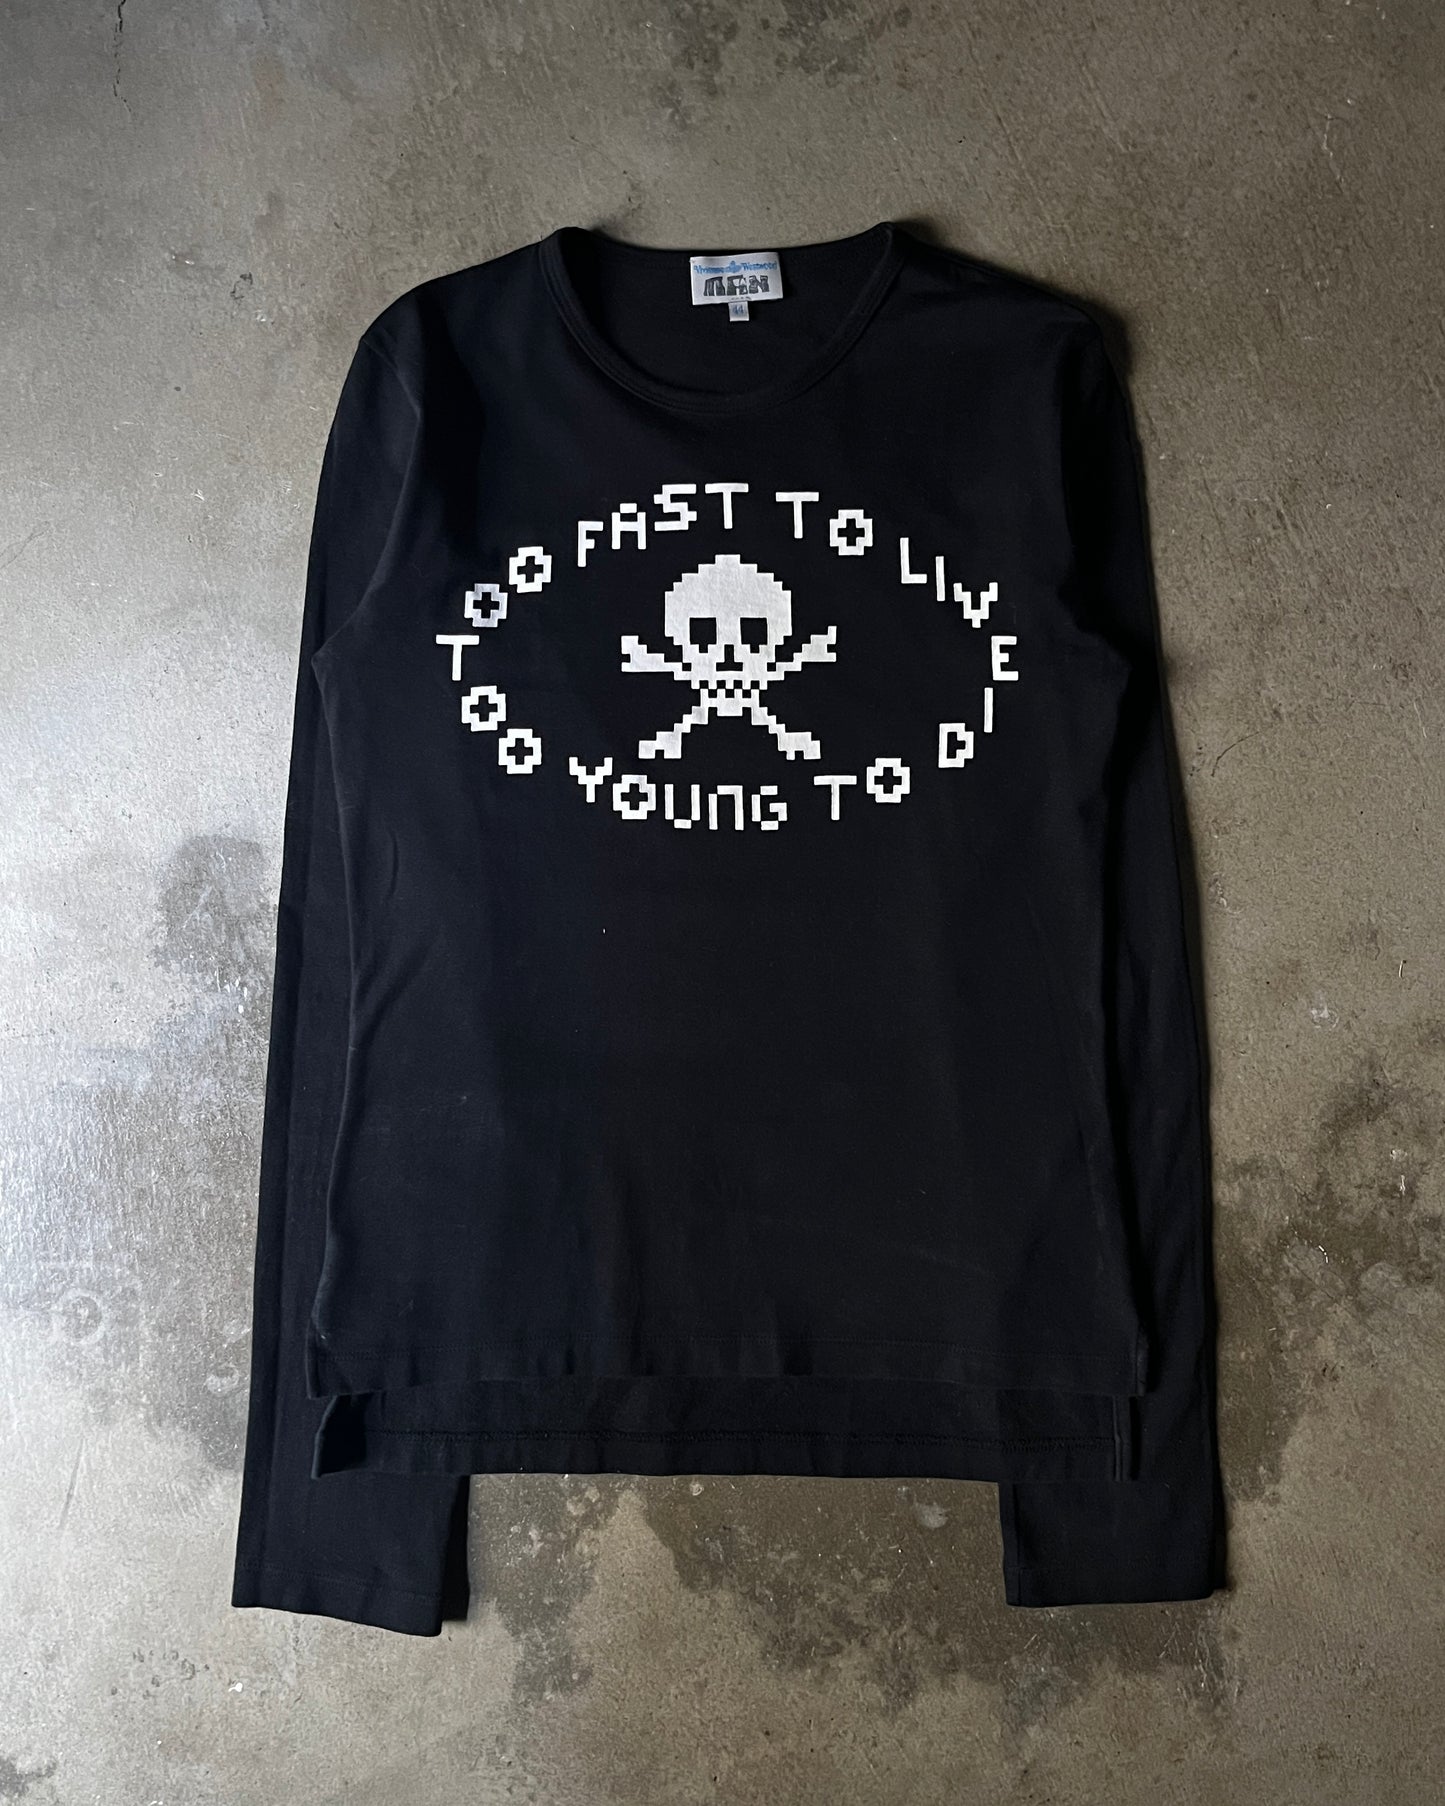 Vivienne Westwood "Too Fast To Live Too Young To Die" Longsleeve